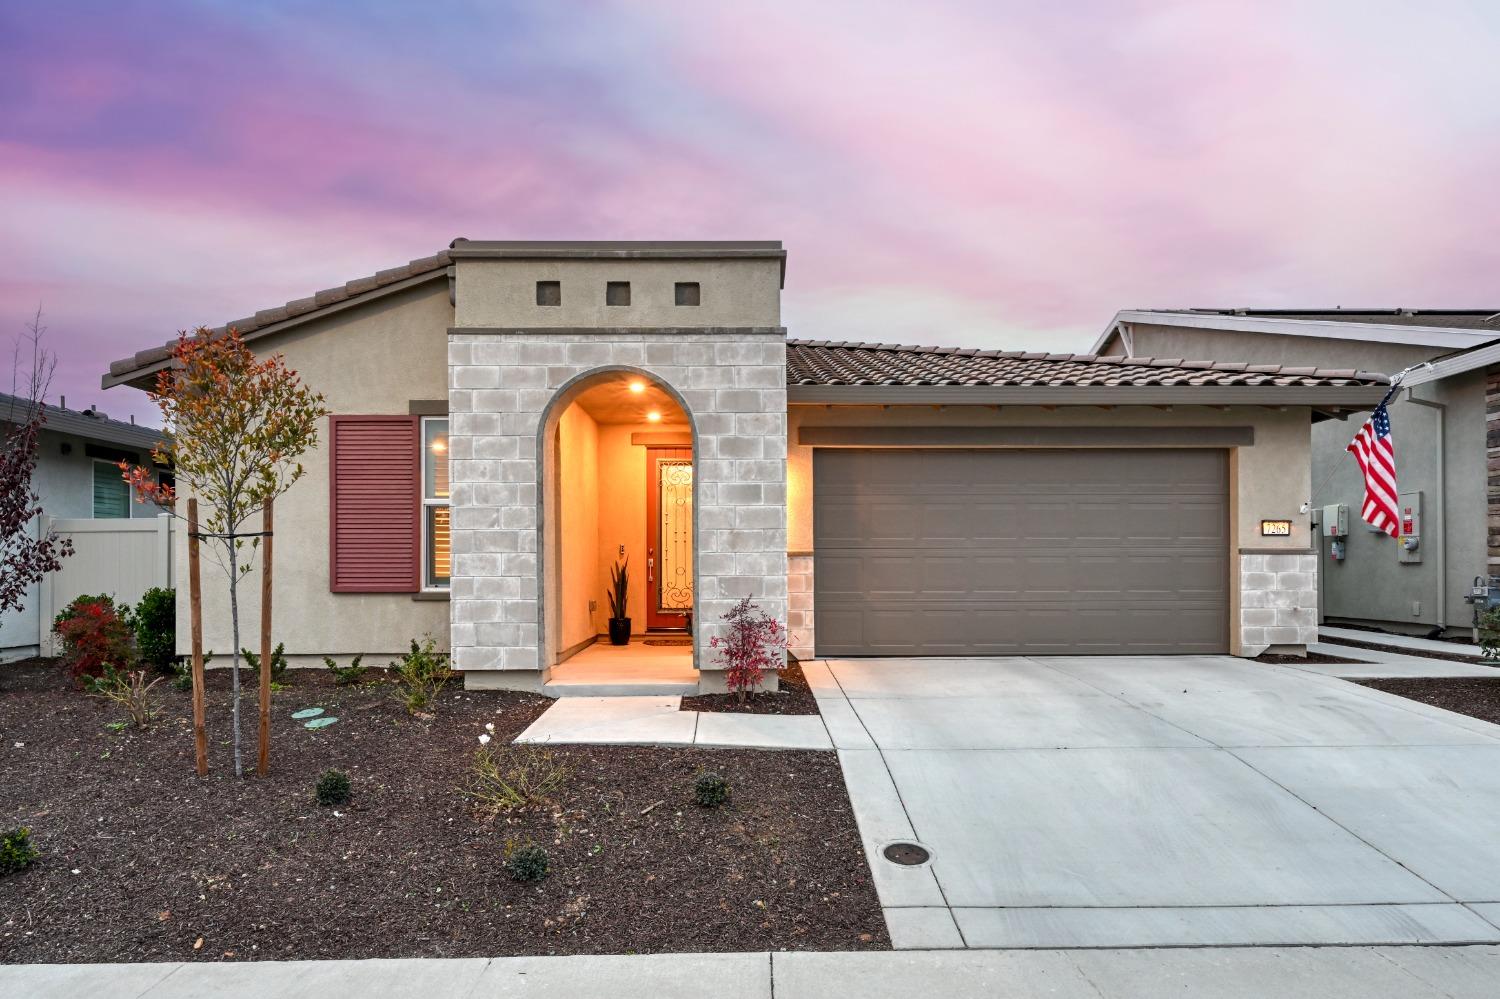 Photo of 7265 Universal Ln in Roseville, CA